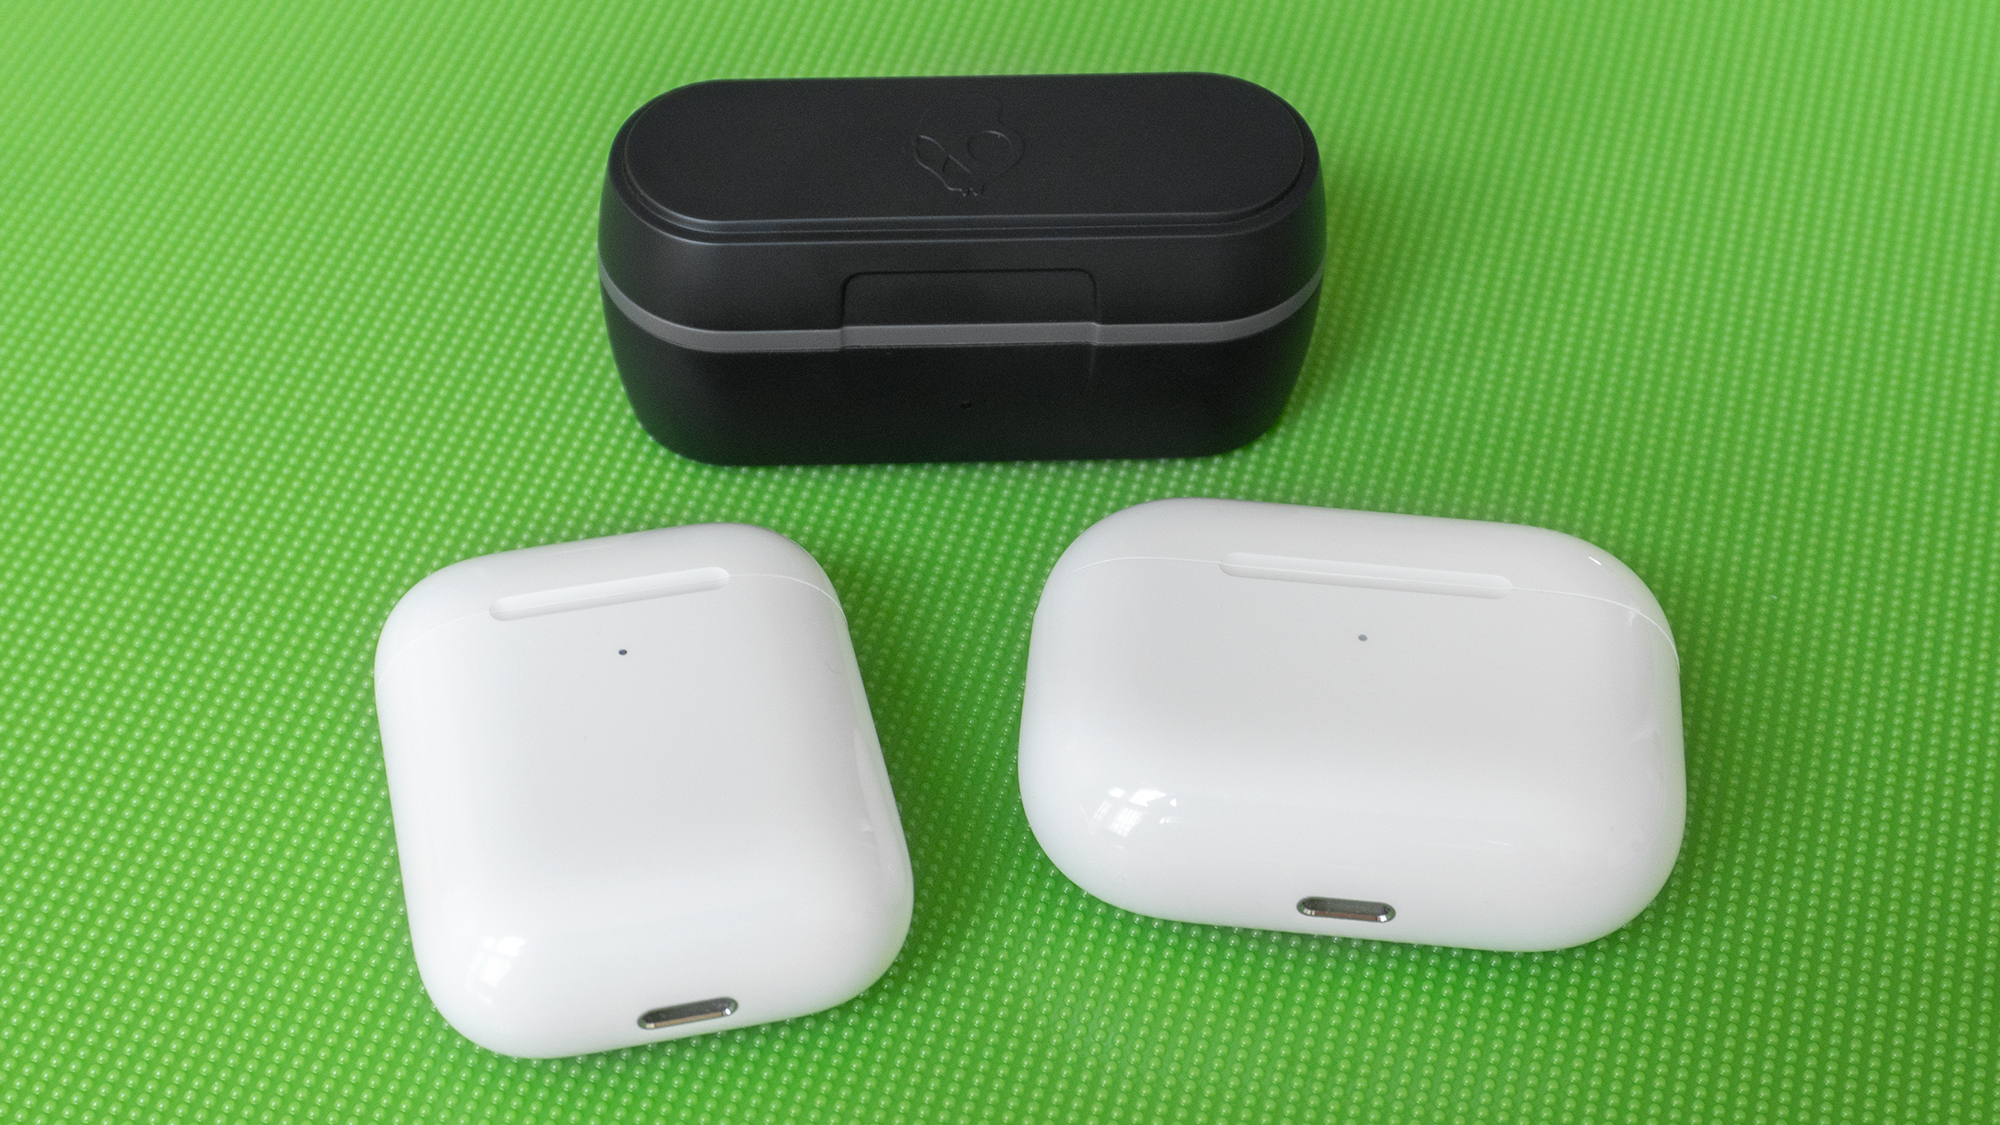 The Jib True's charging case isn't that much larger than the AirPods and AirPods Pro cases, and is very easy to slide into a pocket. (Photo: Andrew Liszewski /Gizmodo)